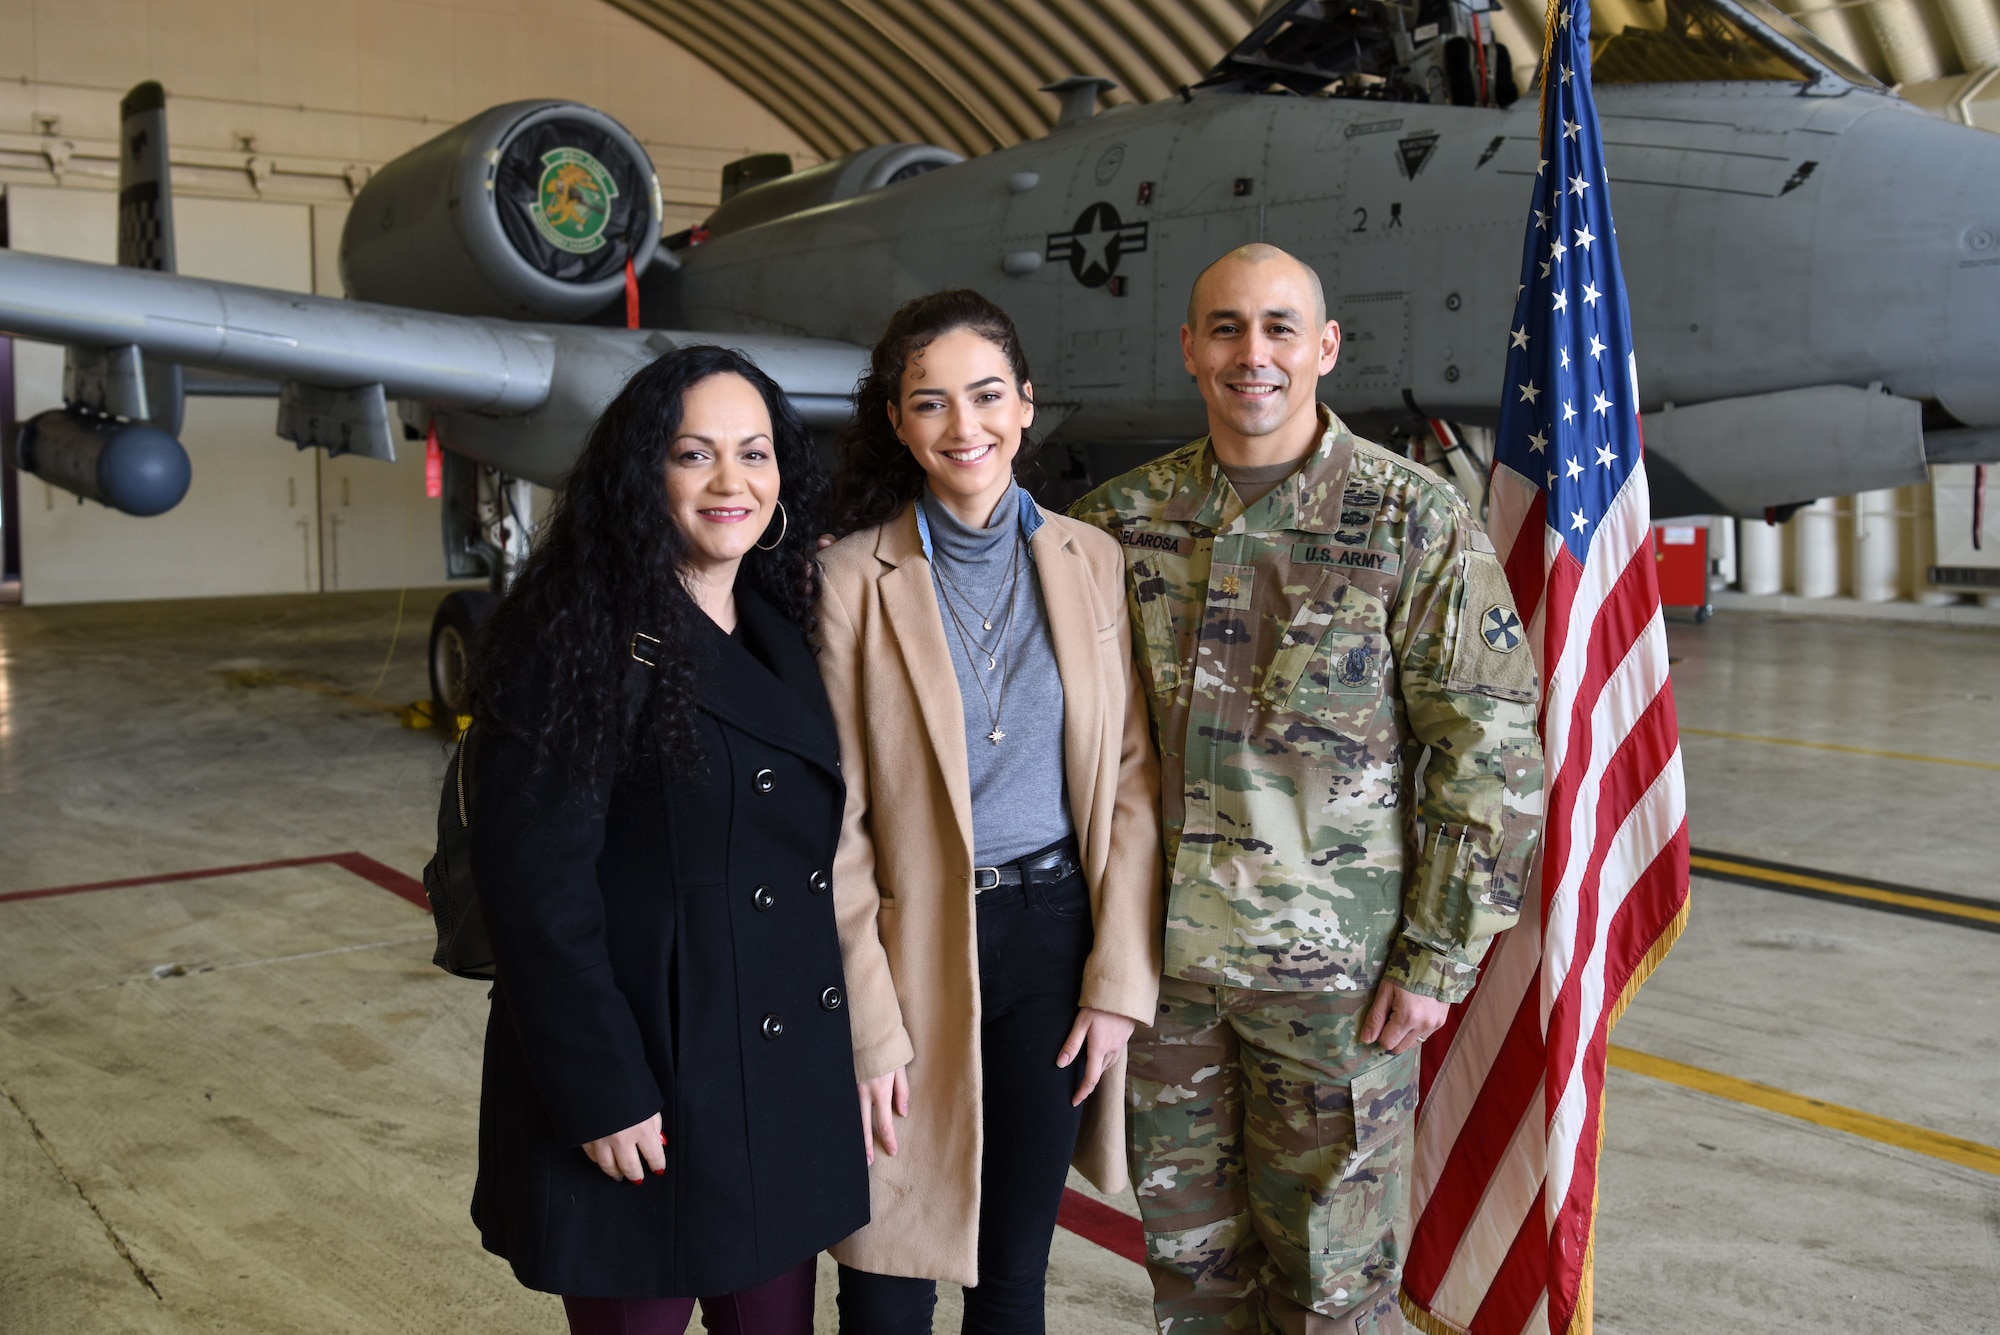 (Left to right) Mia De La Rosa, Samantha De La Rosa, and U.S. Army Maj. Rudy De La Rosa pose for a photo after Samantha’s swearing-in at Osan Air Base, Republic of Korea, Dec. 10, 2018. After several failed attempts at enlisting in the U.S. Army and the U.S. Marine Corps due to her behavioral health records, Samantha was finally accepted into the U.S. Air Force. (U.S. Air Force photo by Senior Airman Kelsey Tucker)